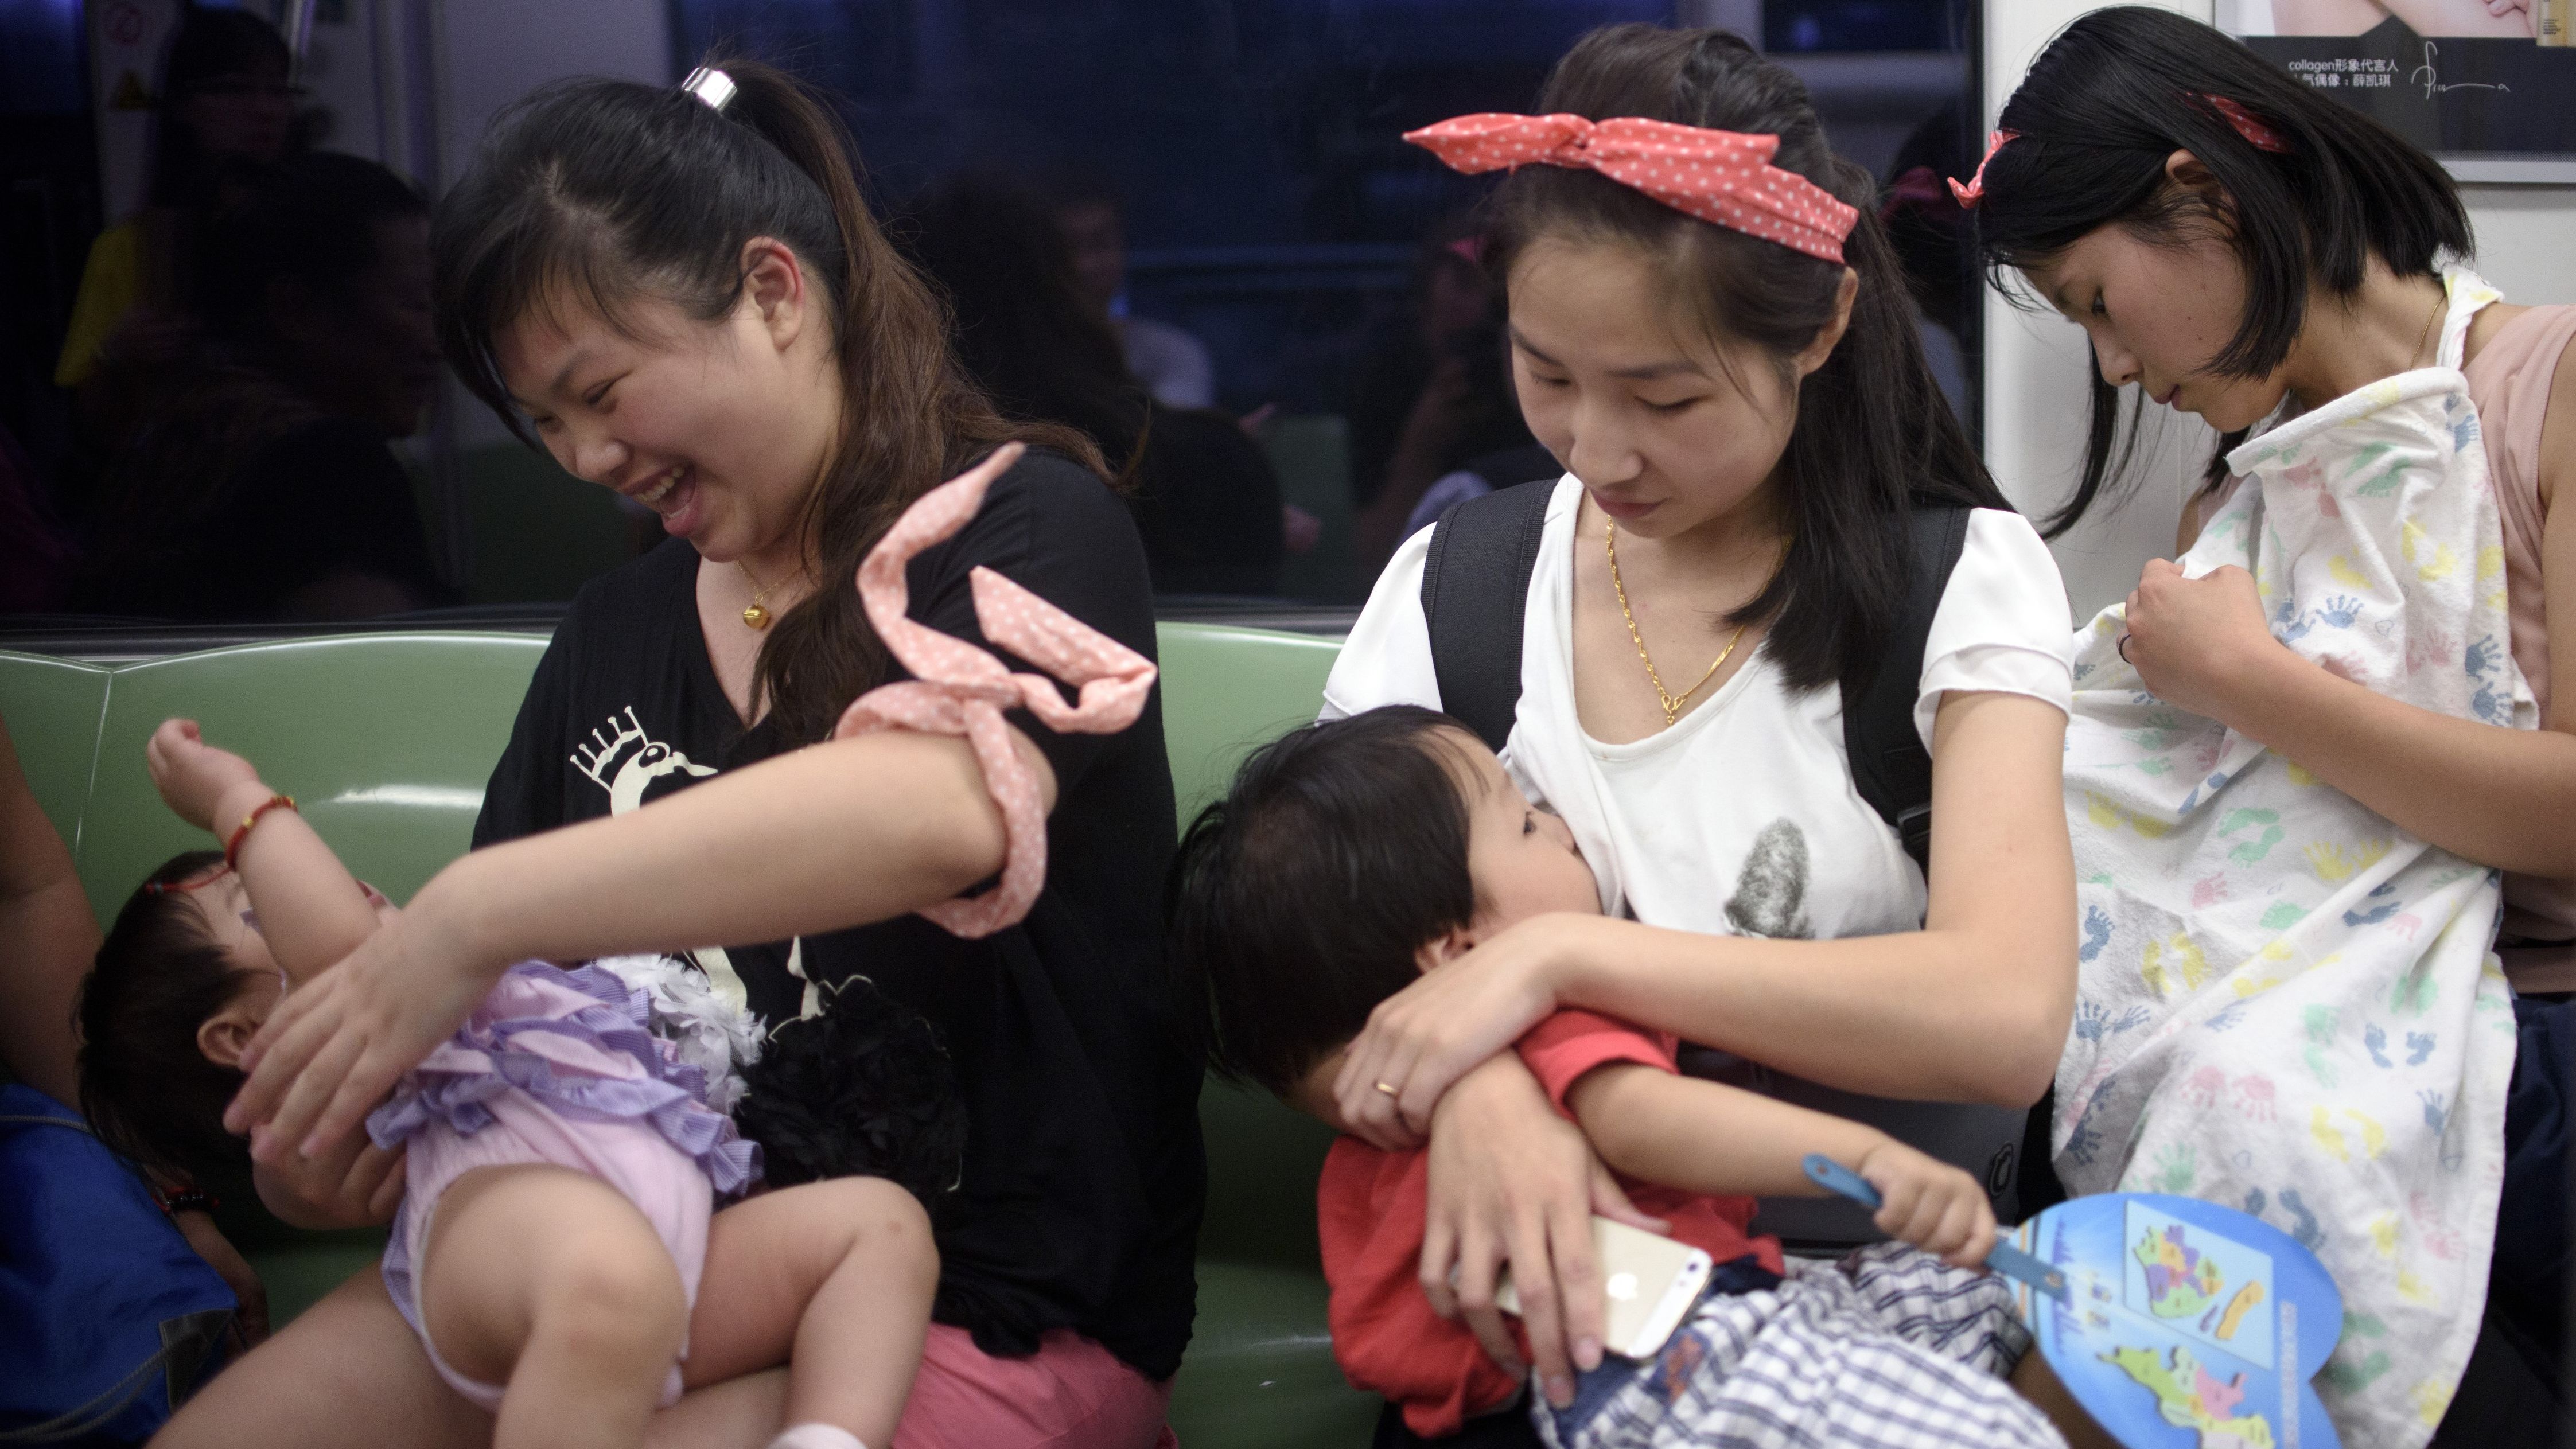 Mothers breastfeed their babies in a Beijing subway during an event celeberating the World Breastfeeding Week on August 1, 2015.  